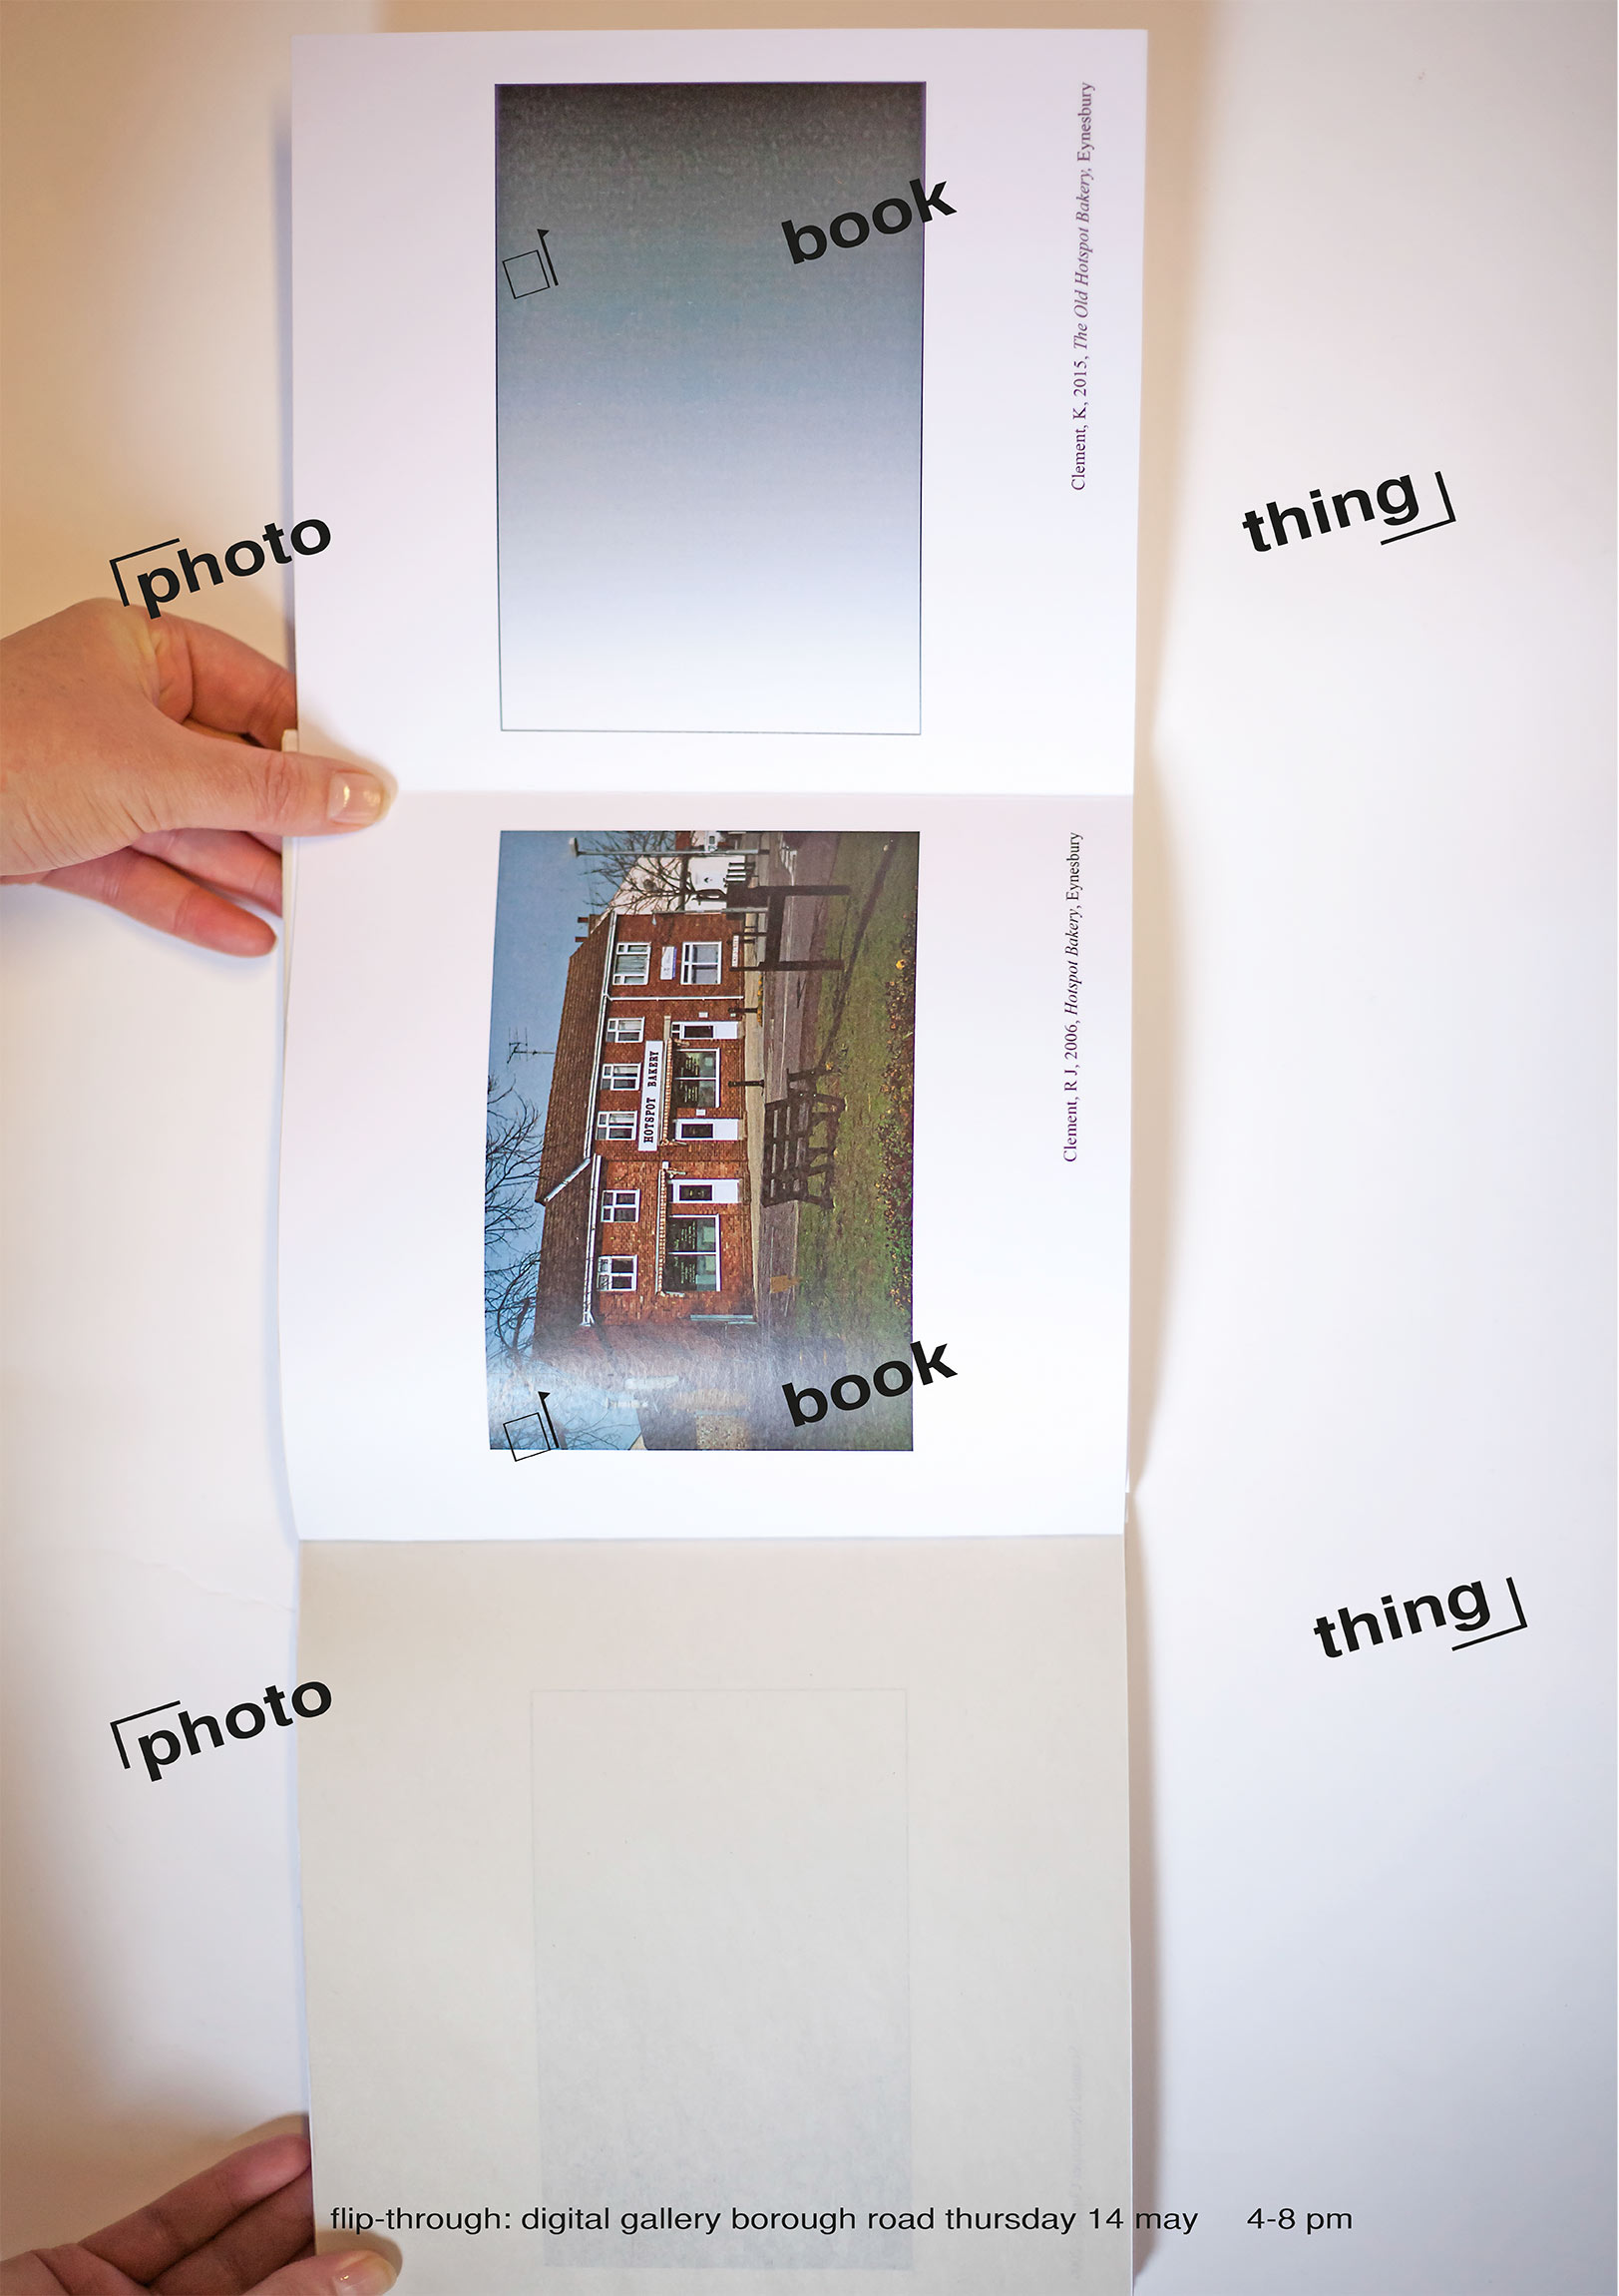 PHOTO-BOOK-THING-4